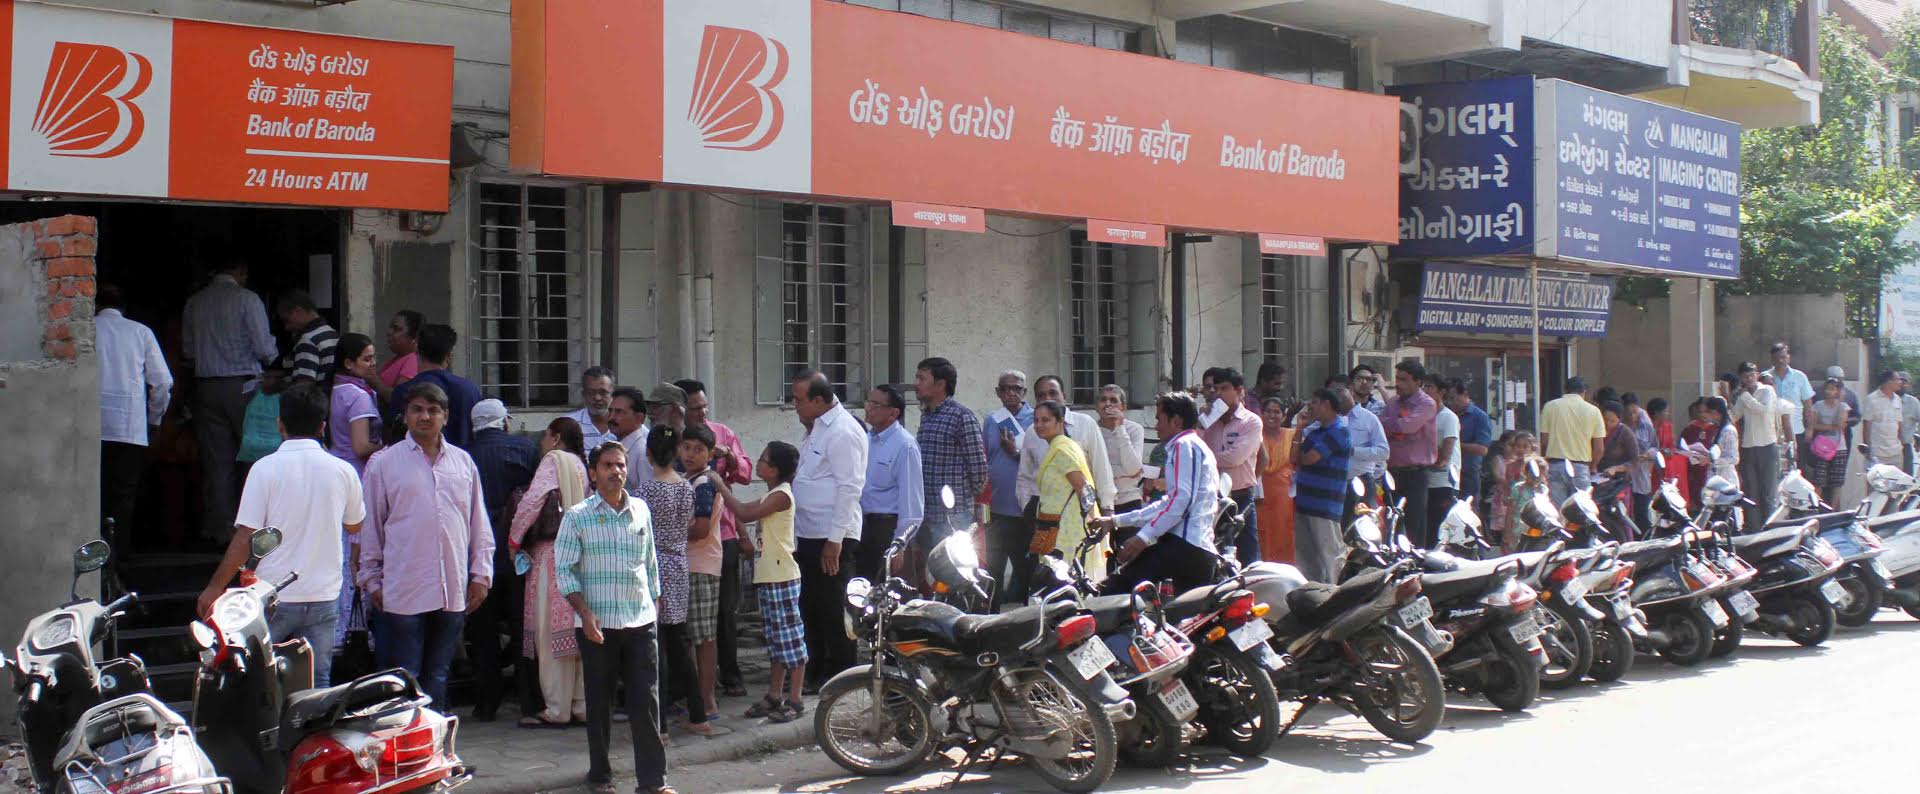 Public Sector Banks staffers to go on strike on 23-24 February